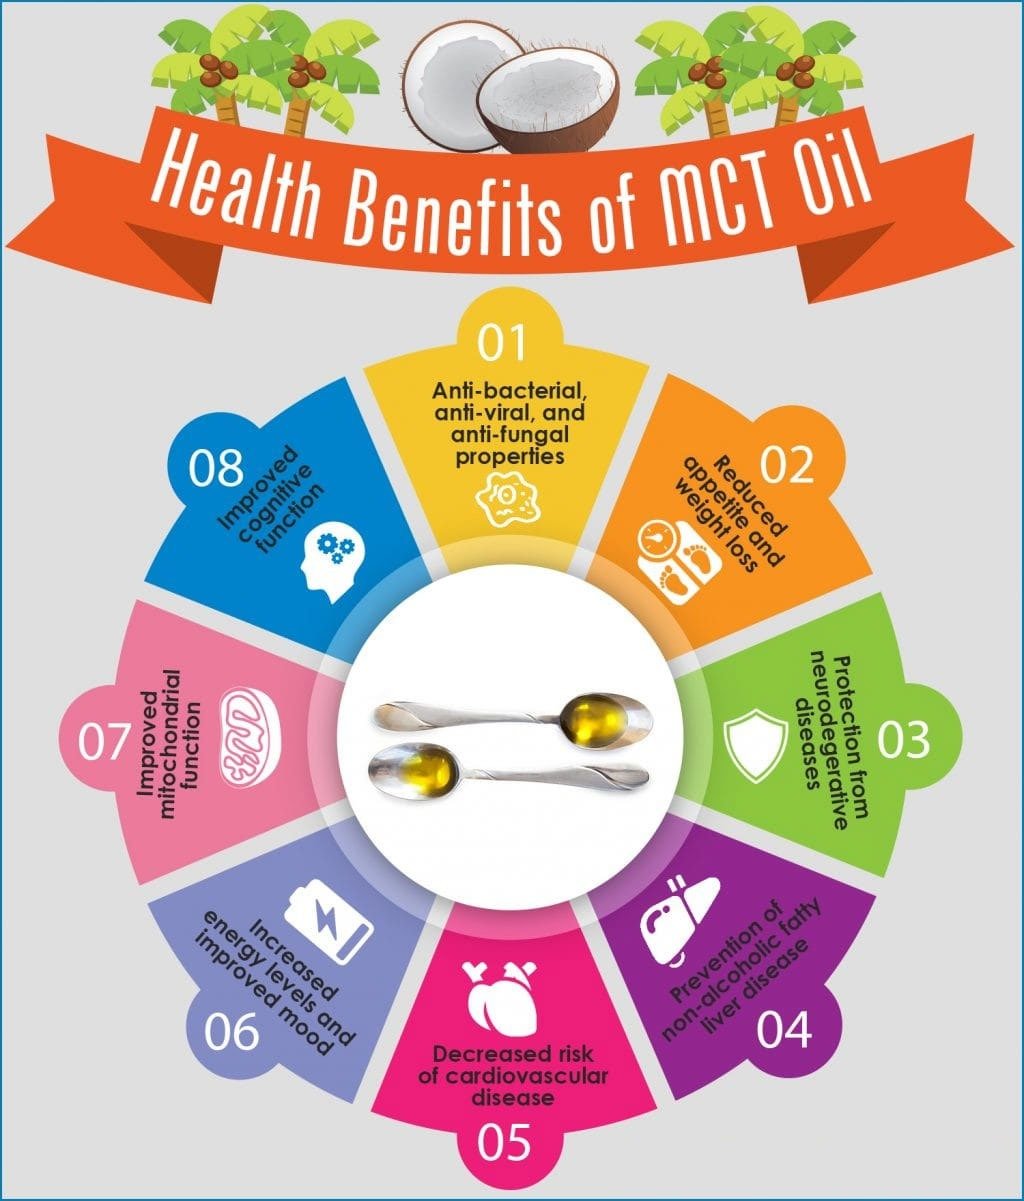 5 Fascinating Mct Oil Benefits For Your Overall Health